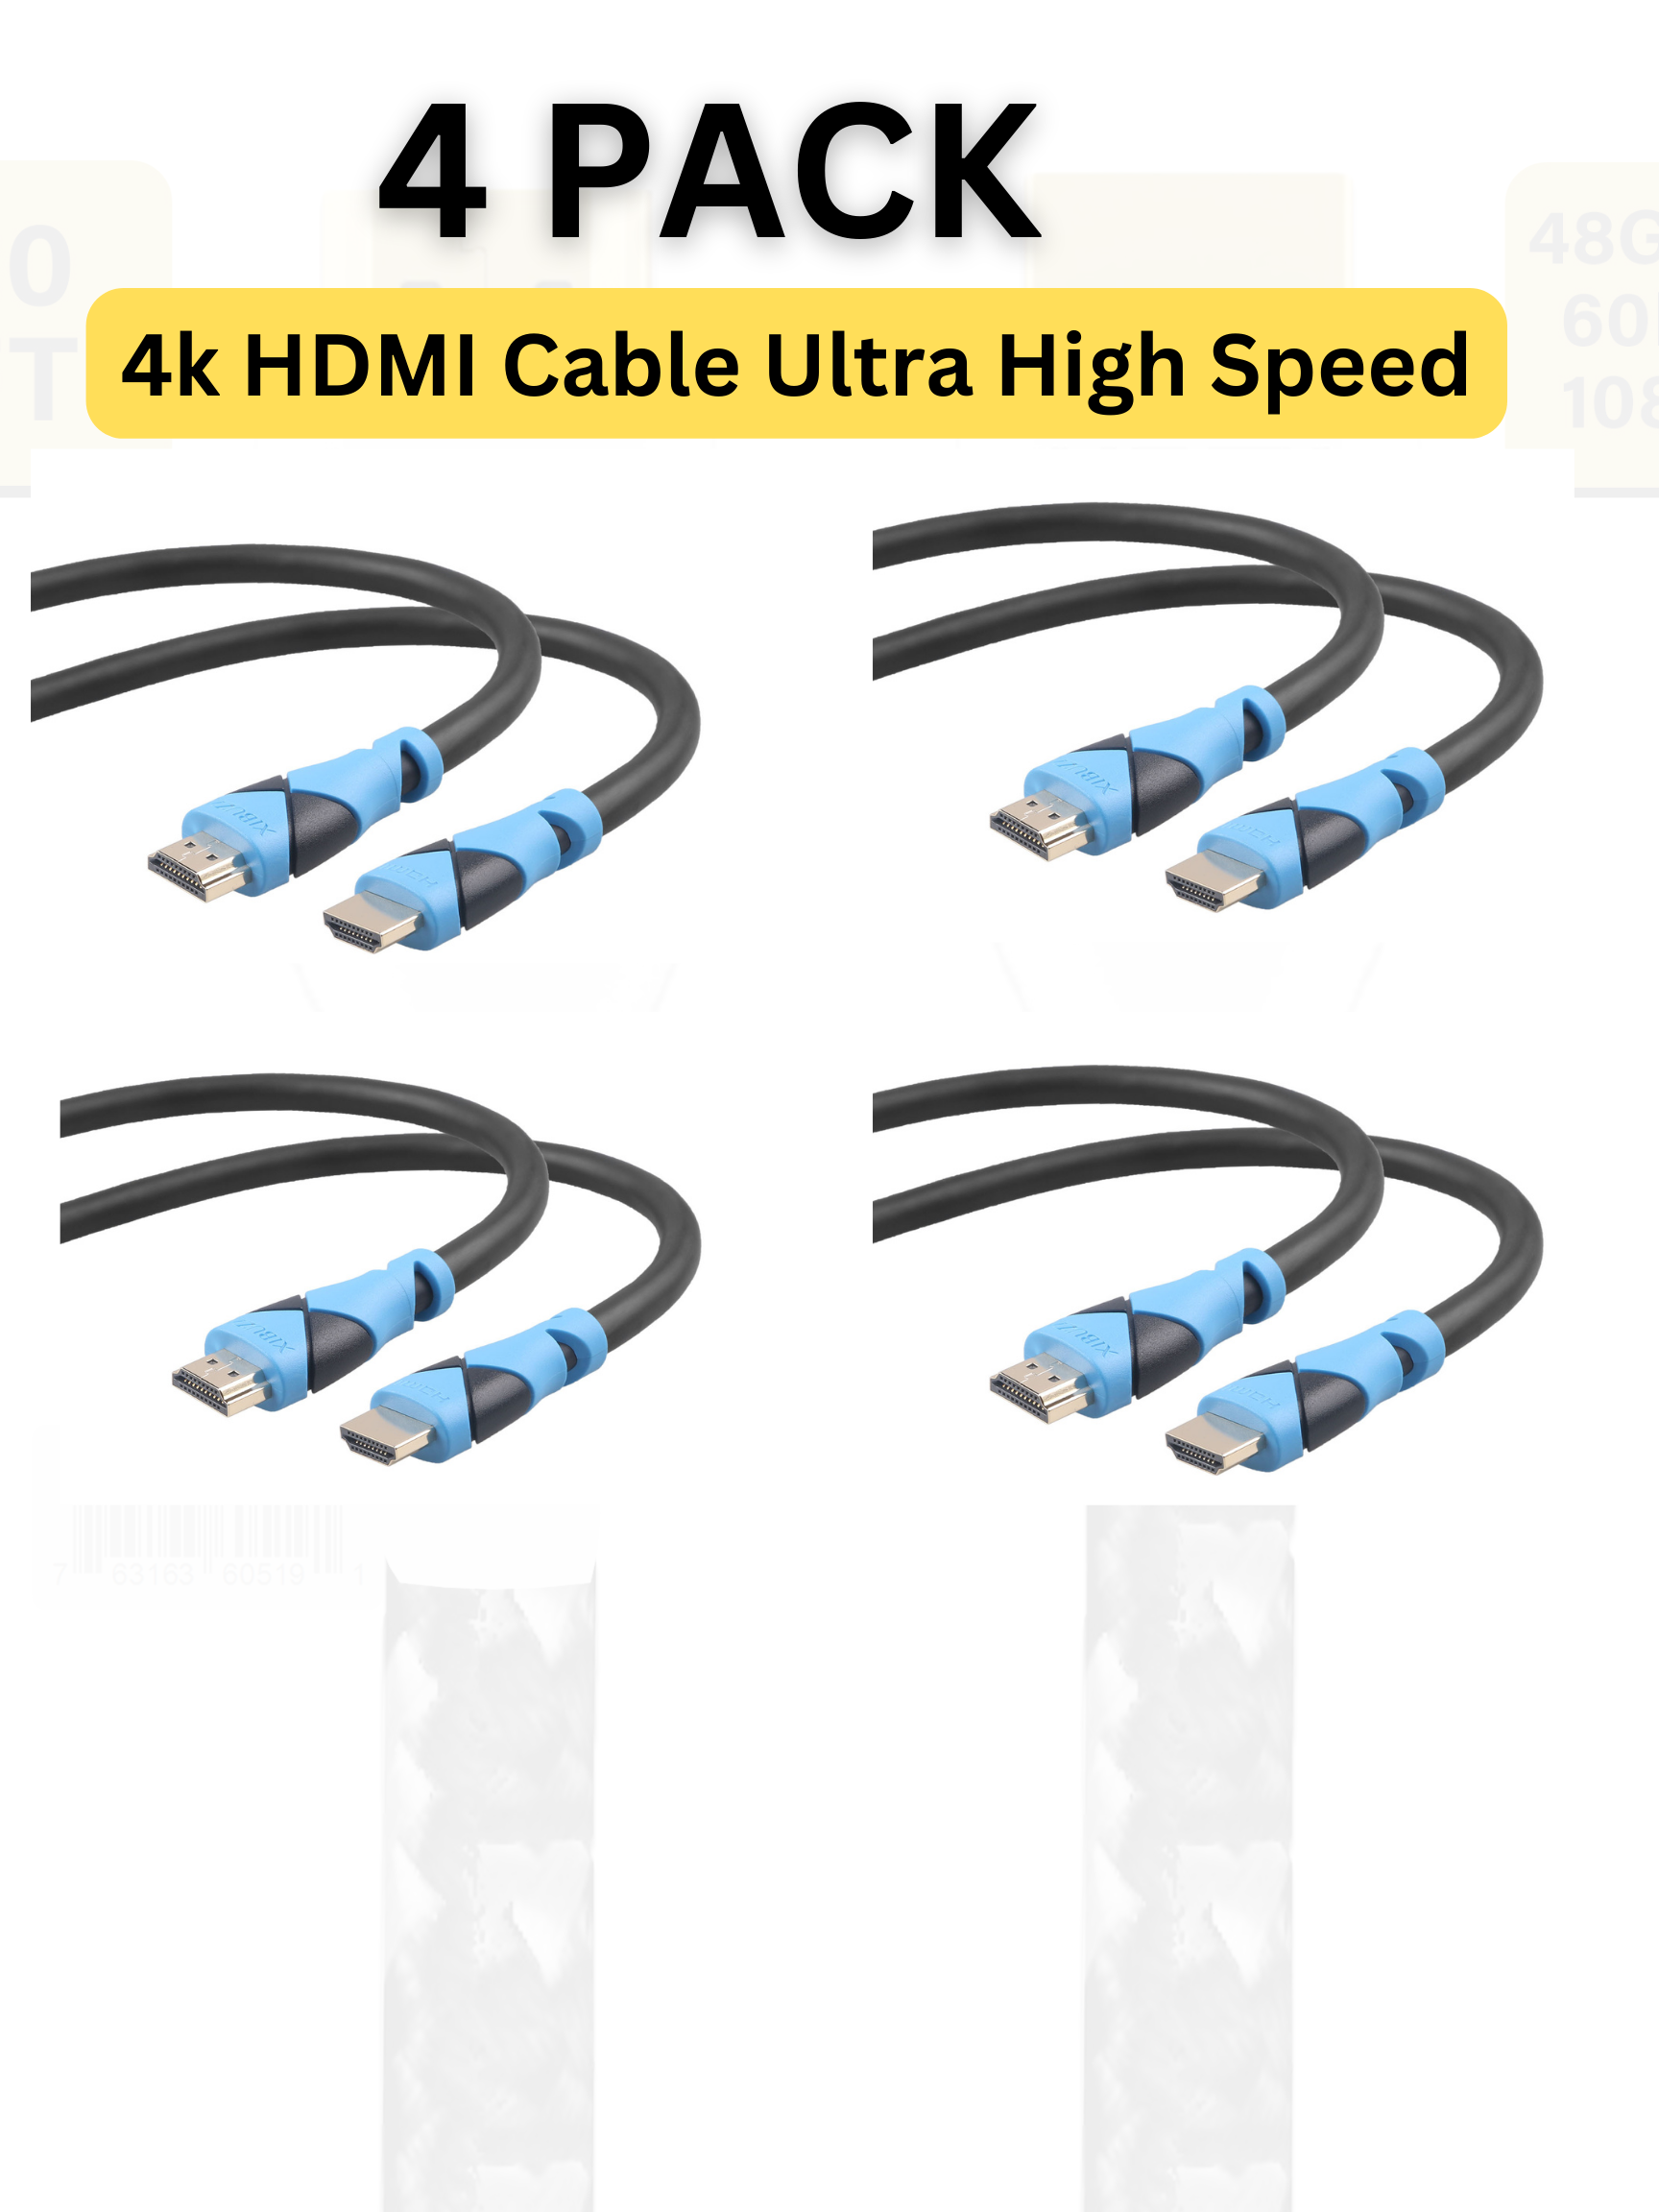 XIBUZZ™ 30 FT 4K HDMI Cord 4K - 4K Resolution HDMI Cable for PS5, Xbox, PC, Laptop and Gaming